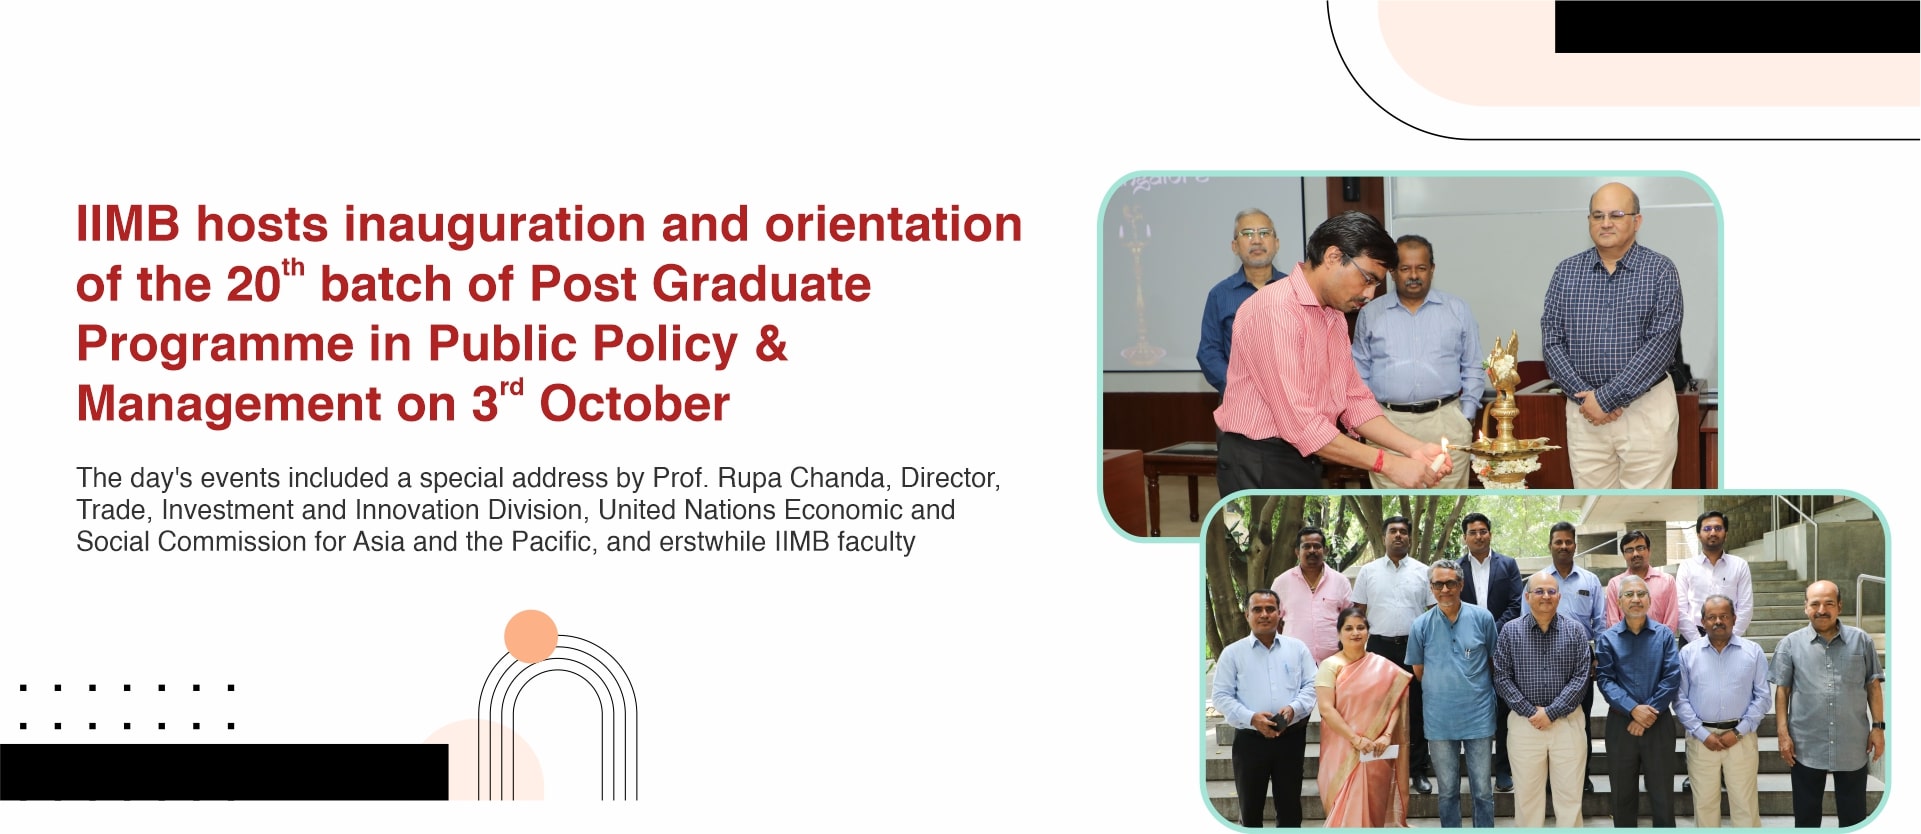 IIMB hosts inauguration and orientation of the 20th batch of Post Graduate Programme in Public Policy & Management on 3rd October